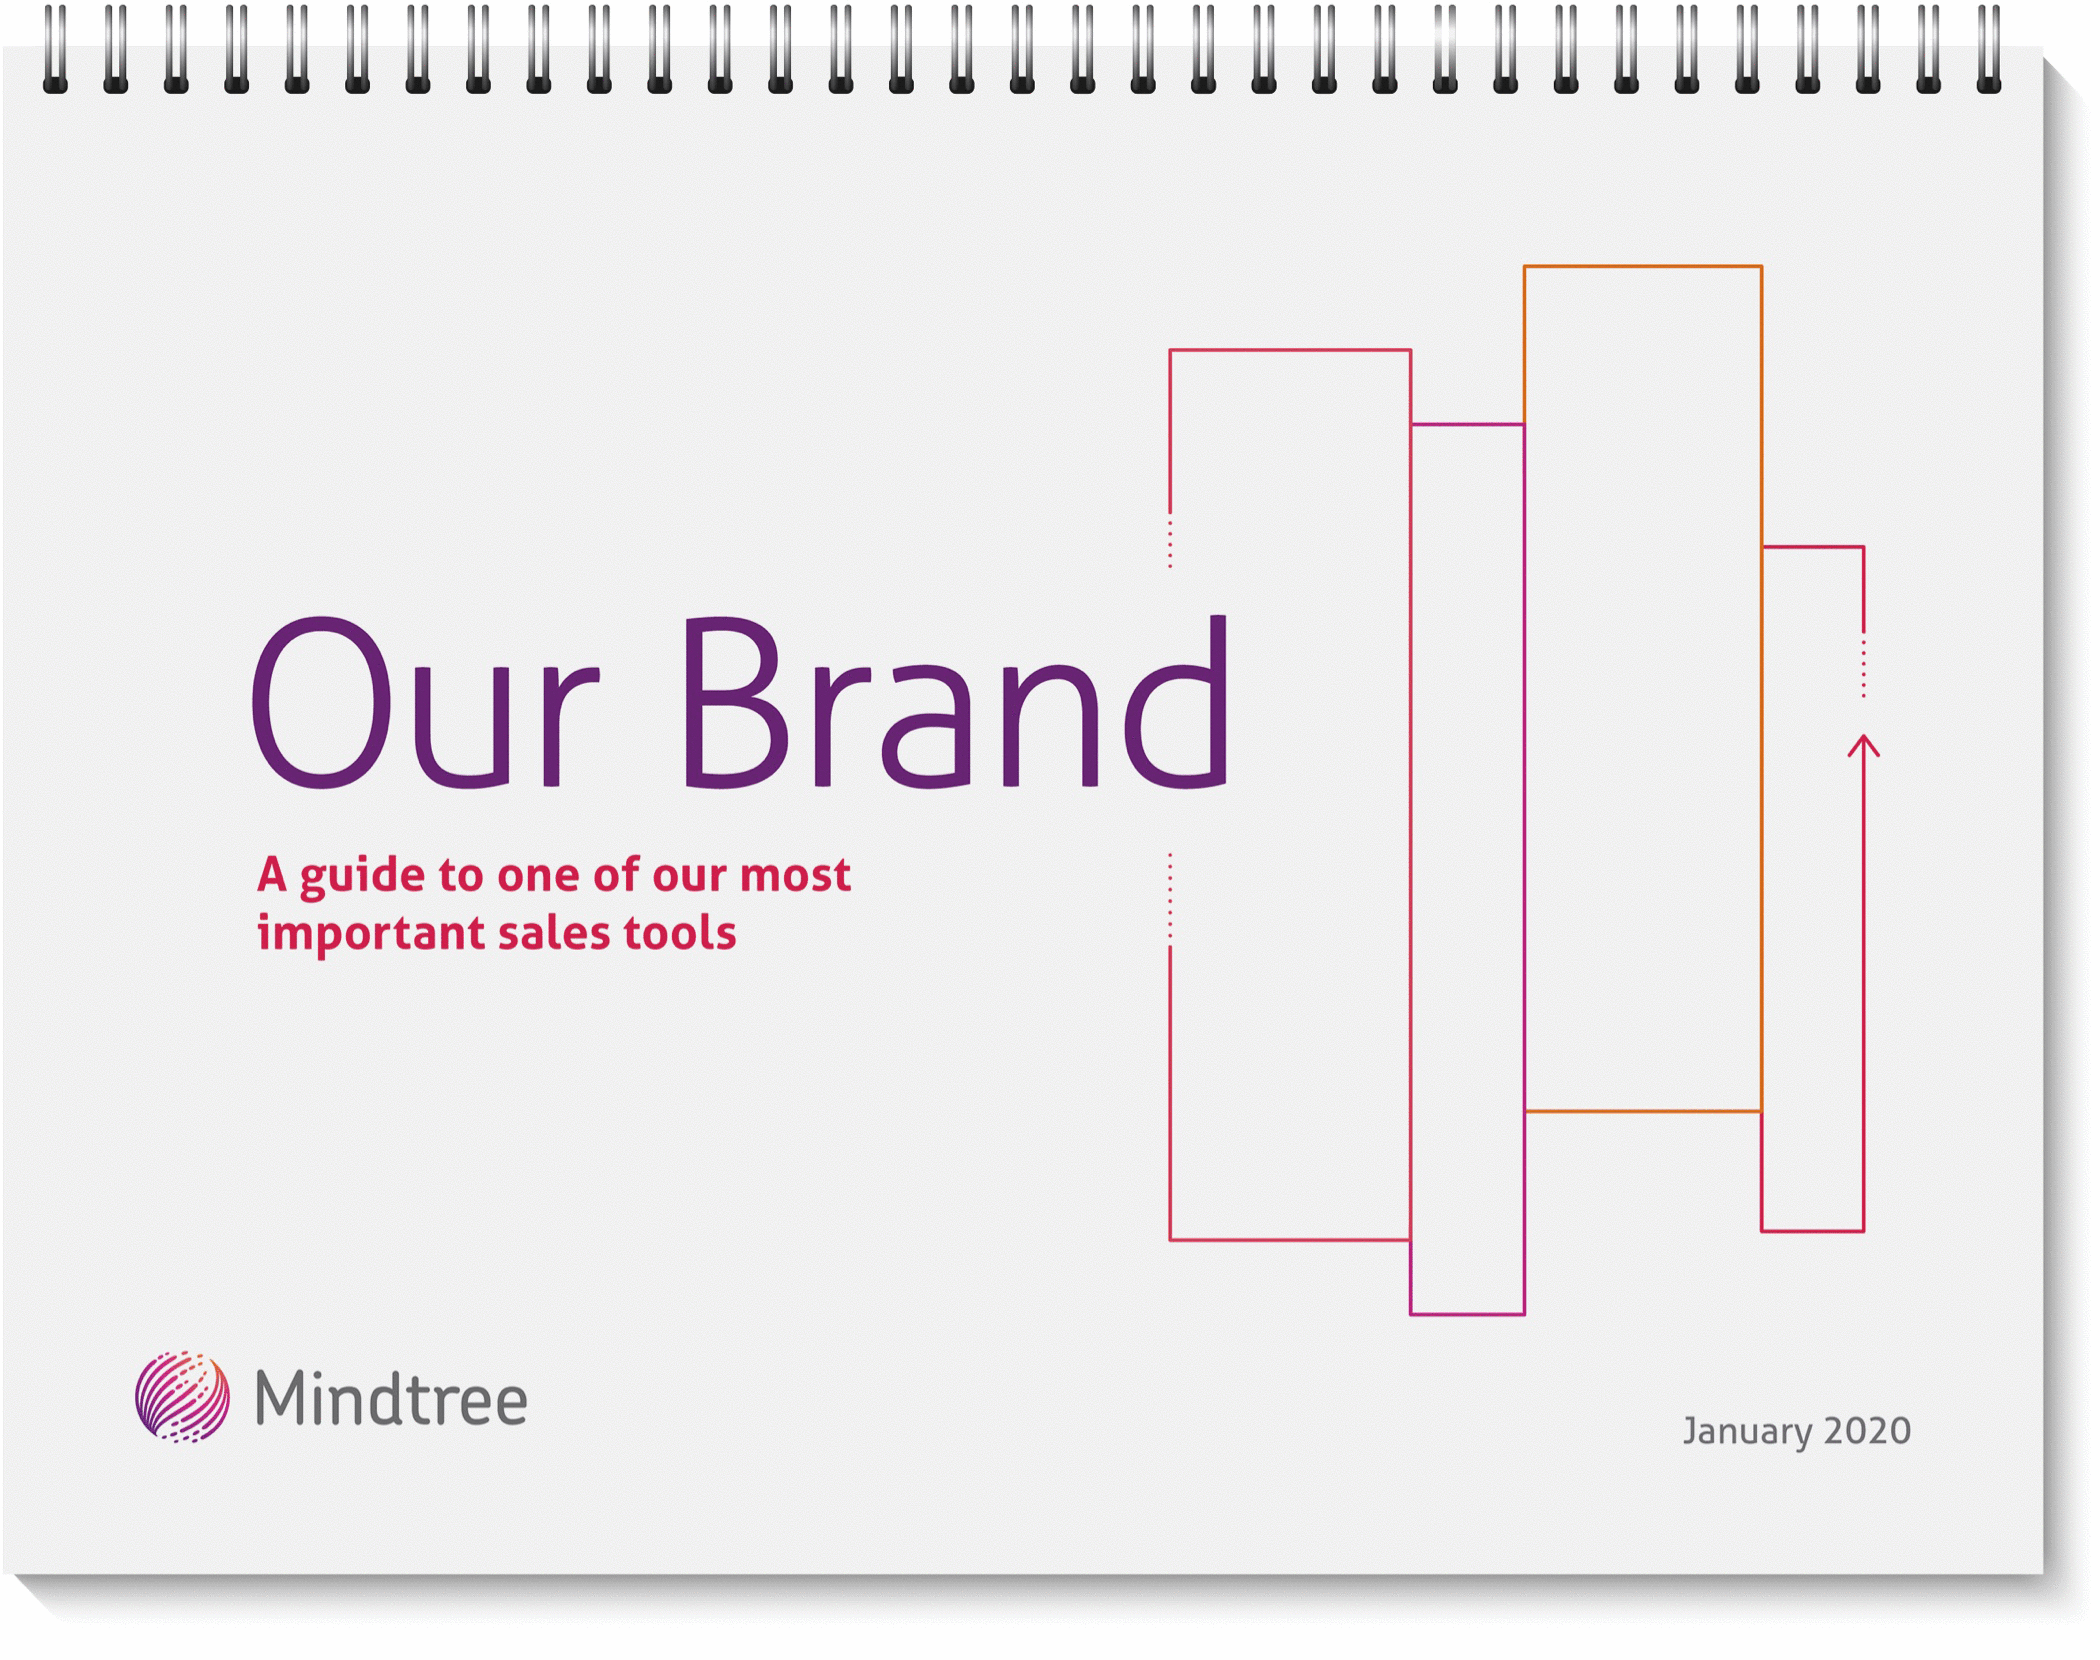 Cover of Mindtree Brand Book: “Our brand: A guide to one of our most important sales tools.”